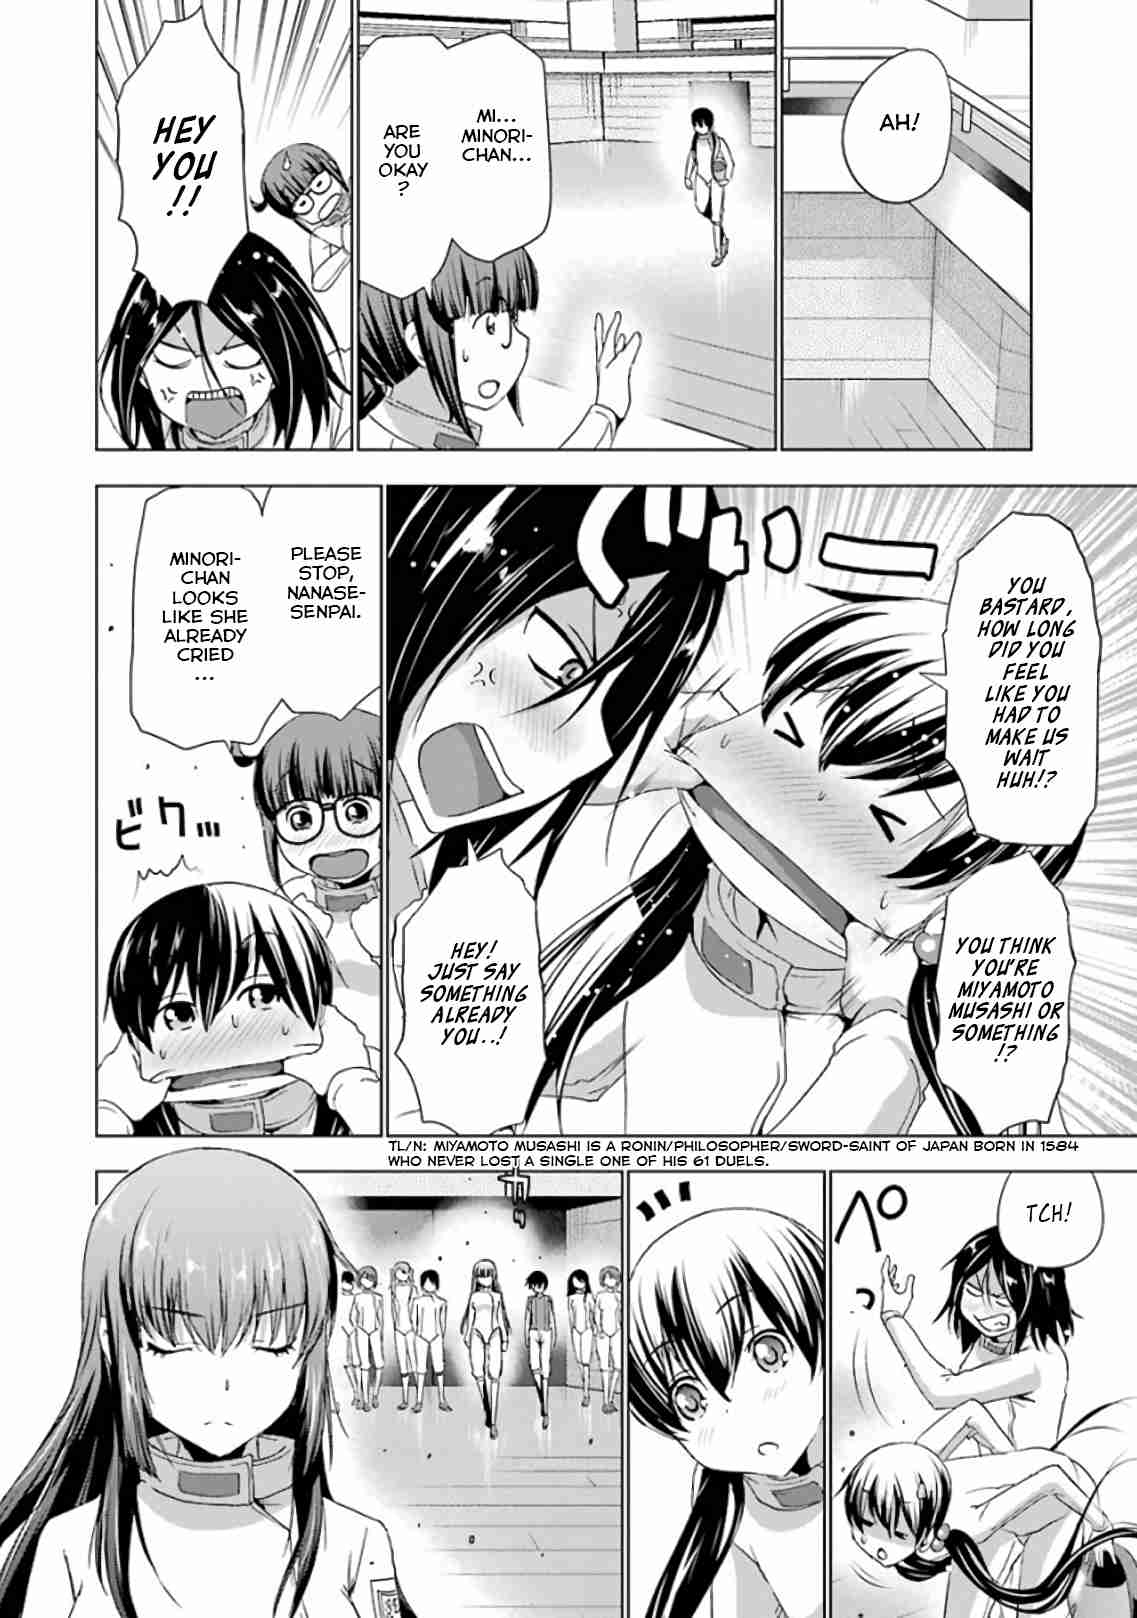 Duel! Vol. 2 Ch. 10 Overlapping strength